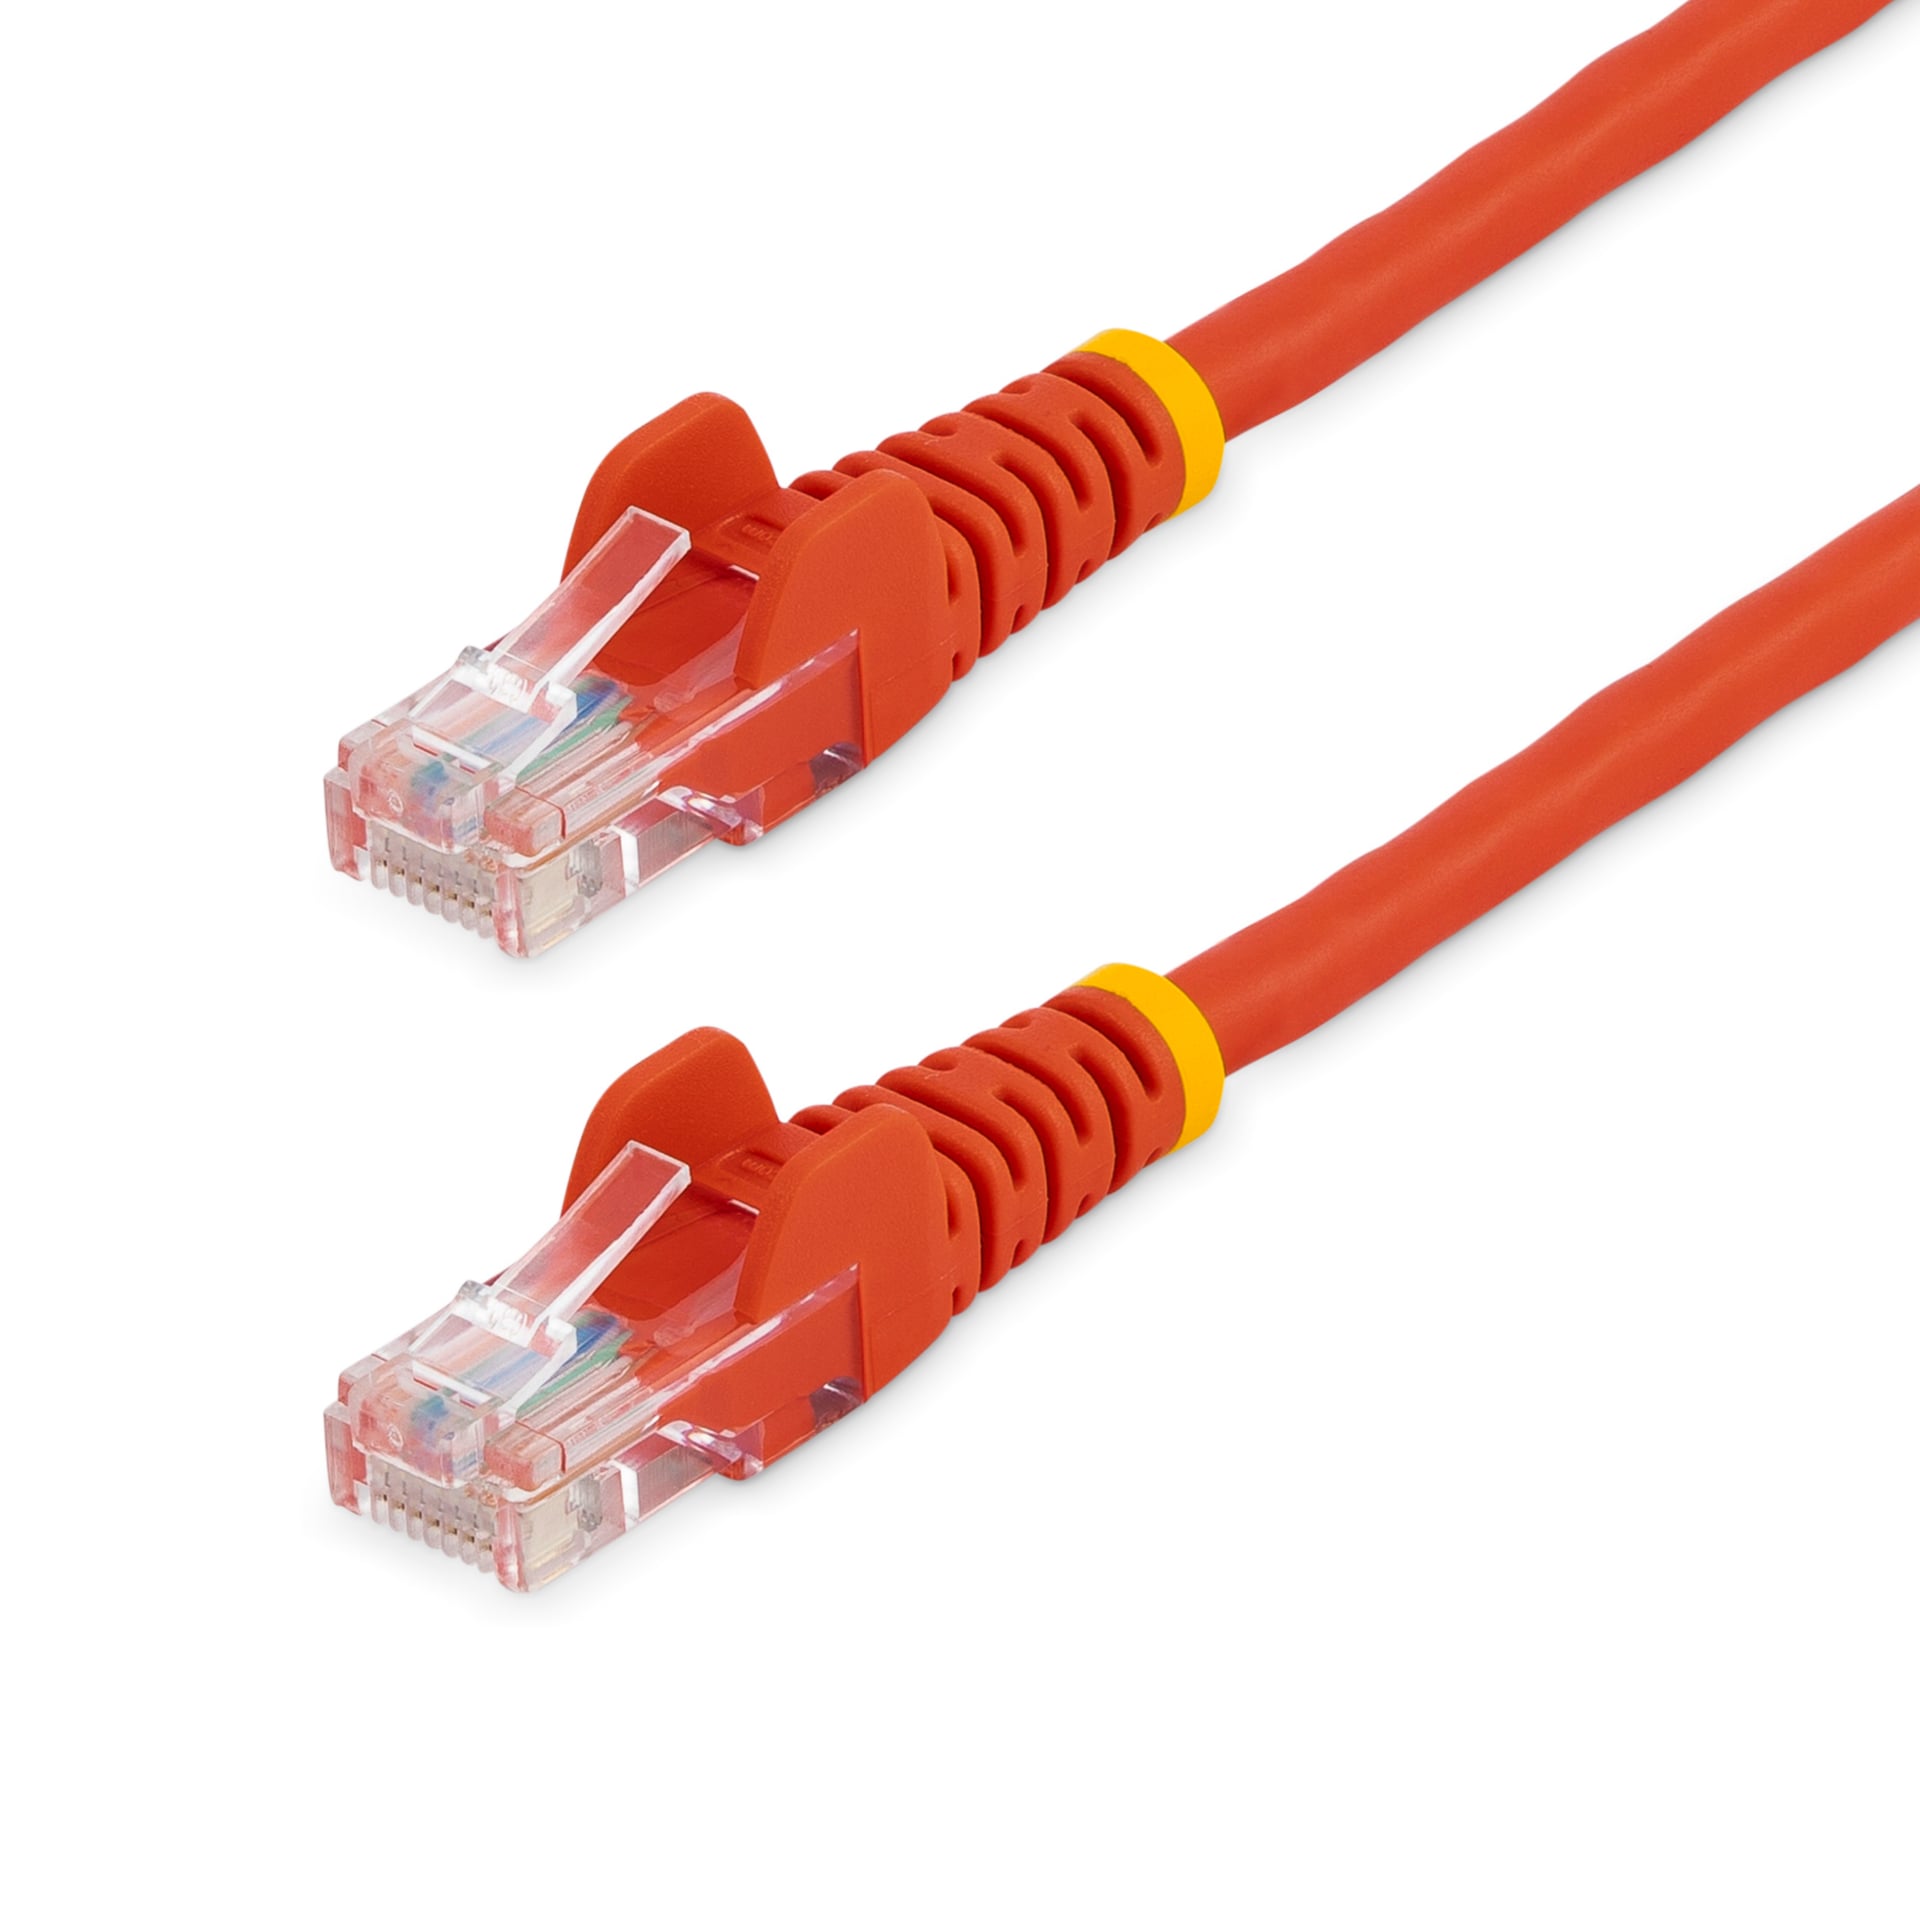 StarTech.com Cat5e Ethernet Cable 3 ft Red - Cat 5e Snagless Patch Cable